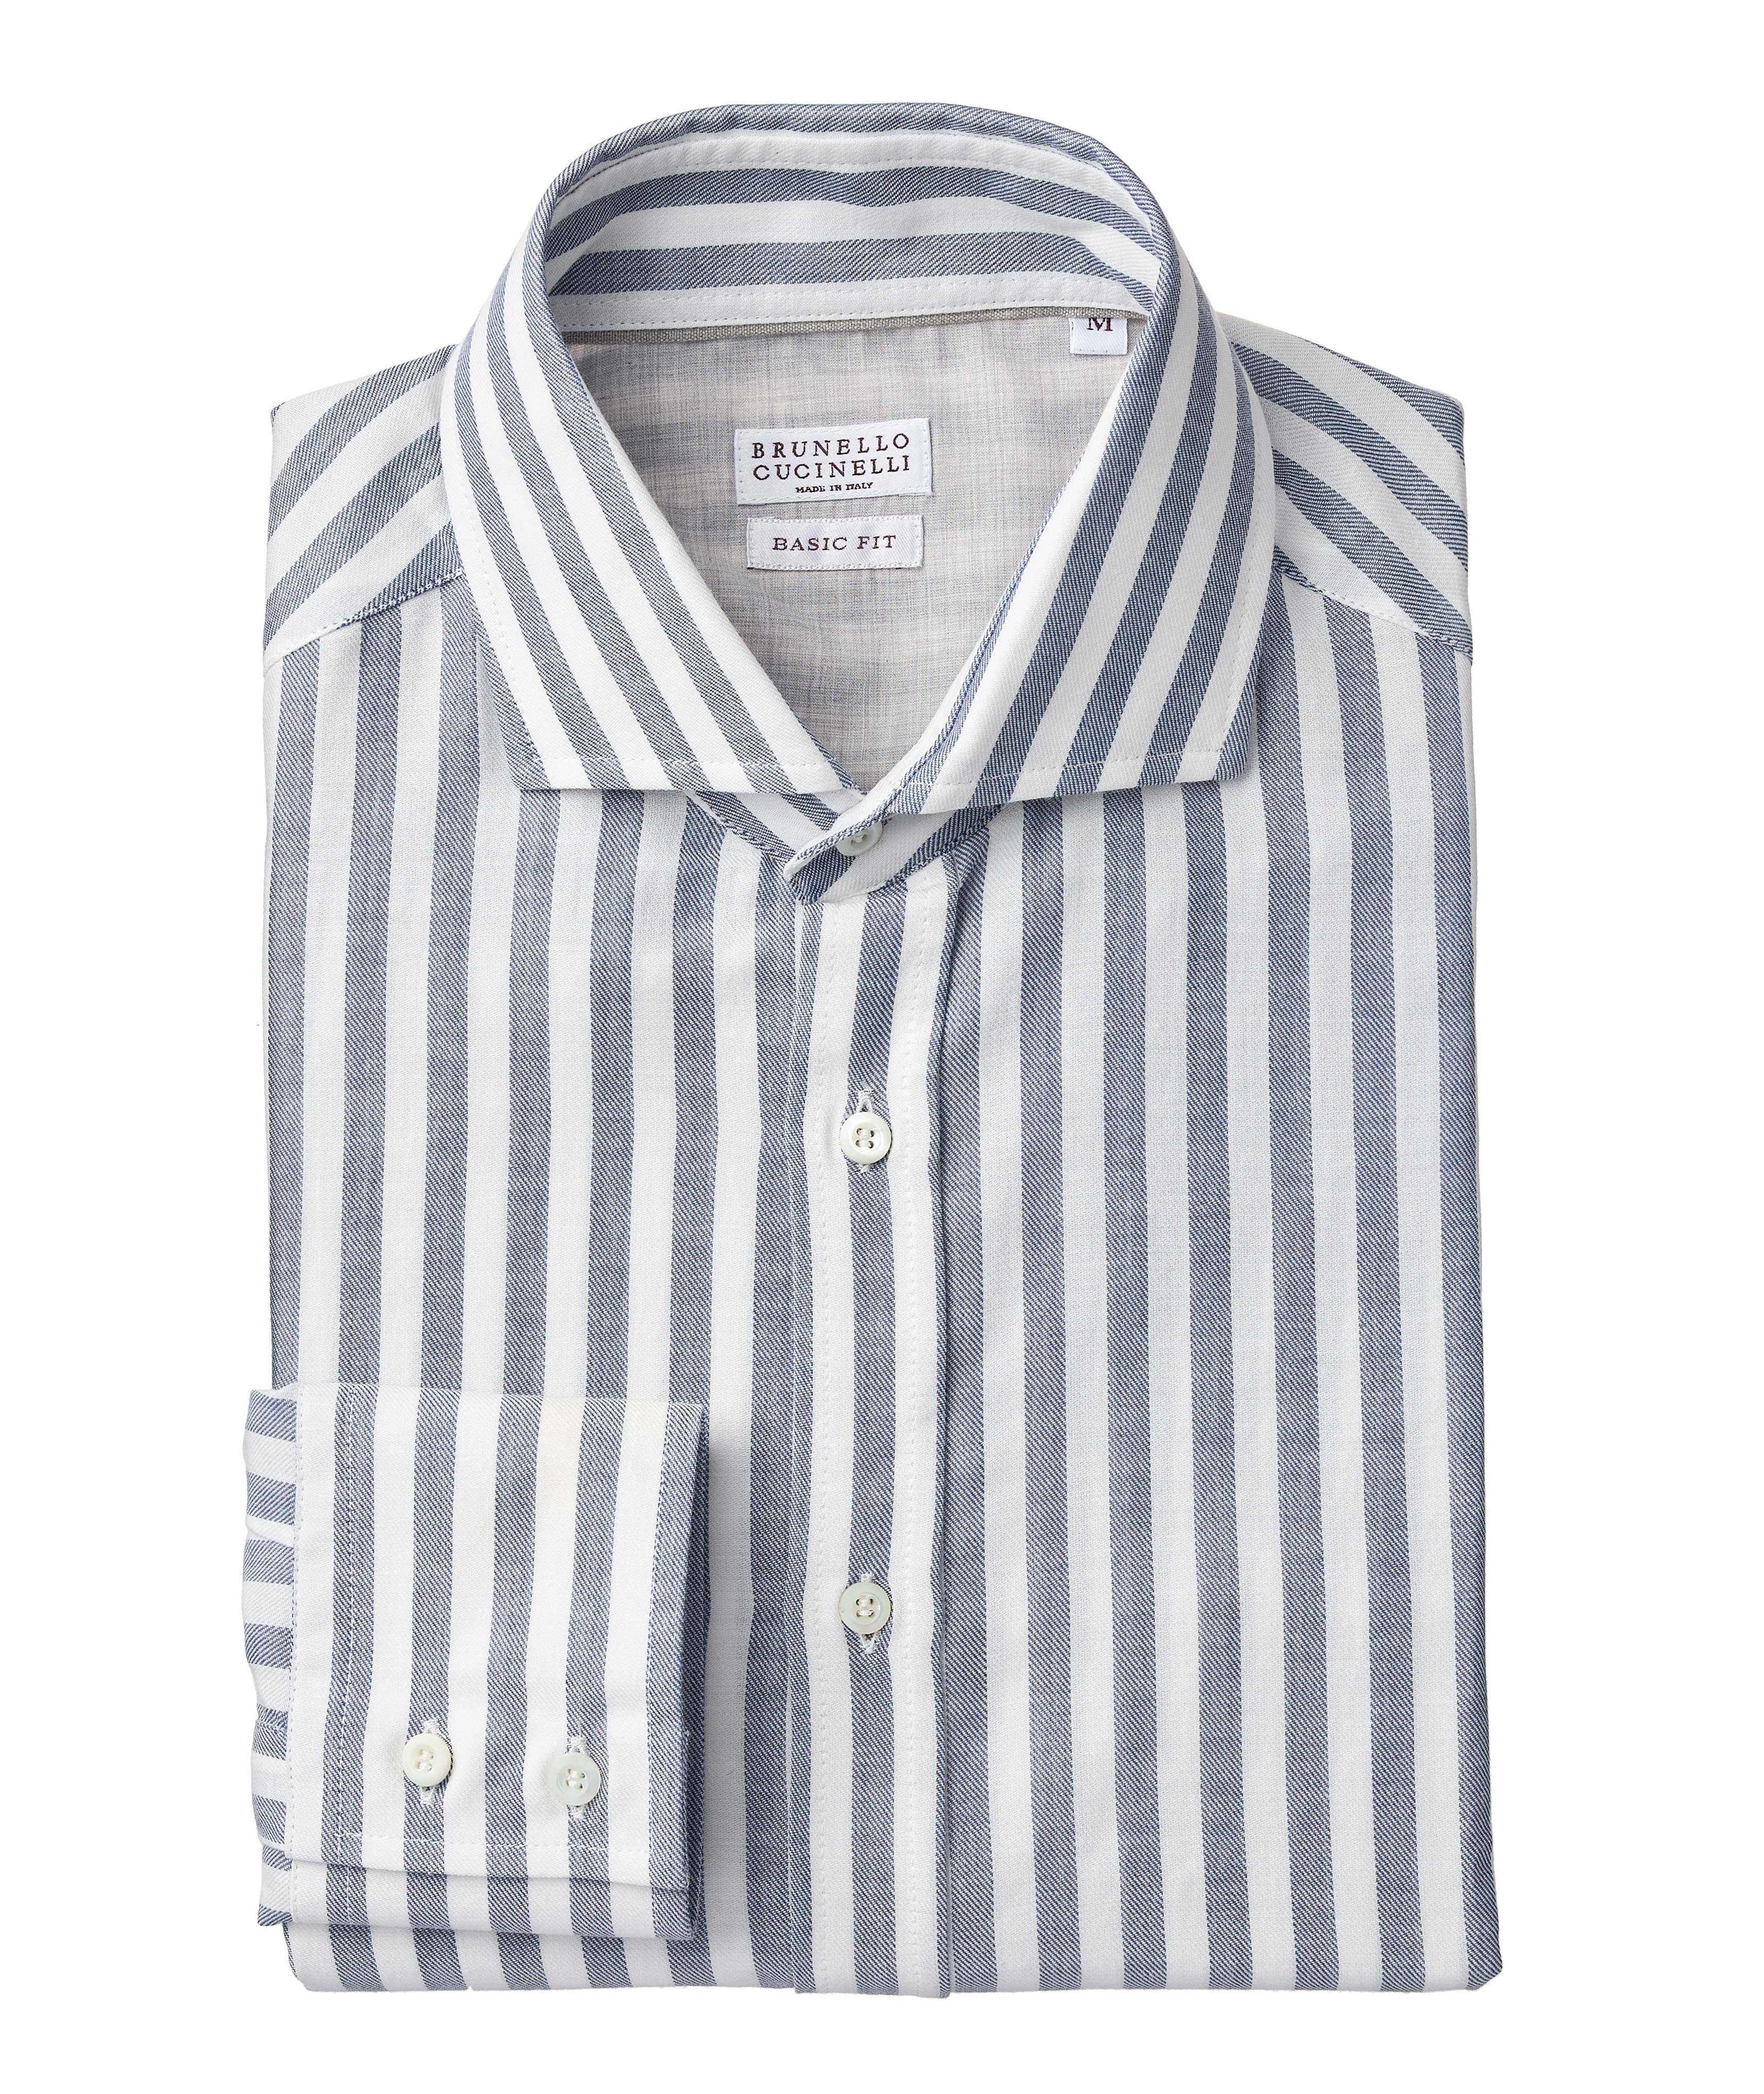 Contemporary-Fit Striped Cotton Shirt image 0